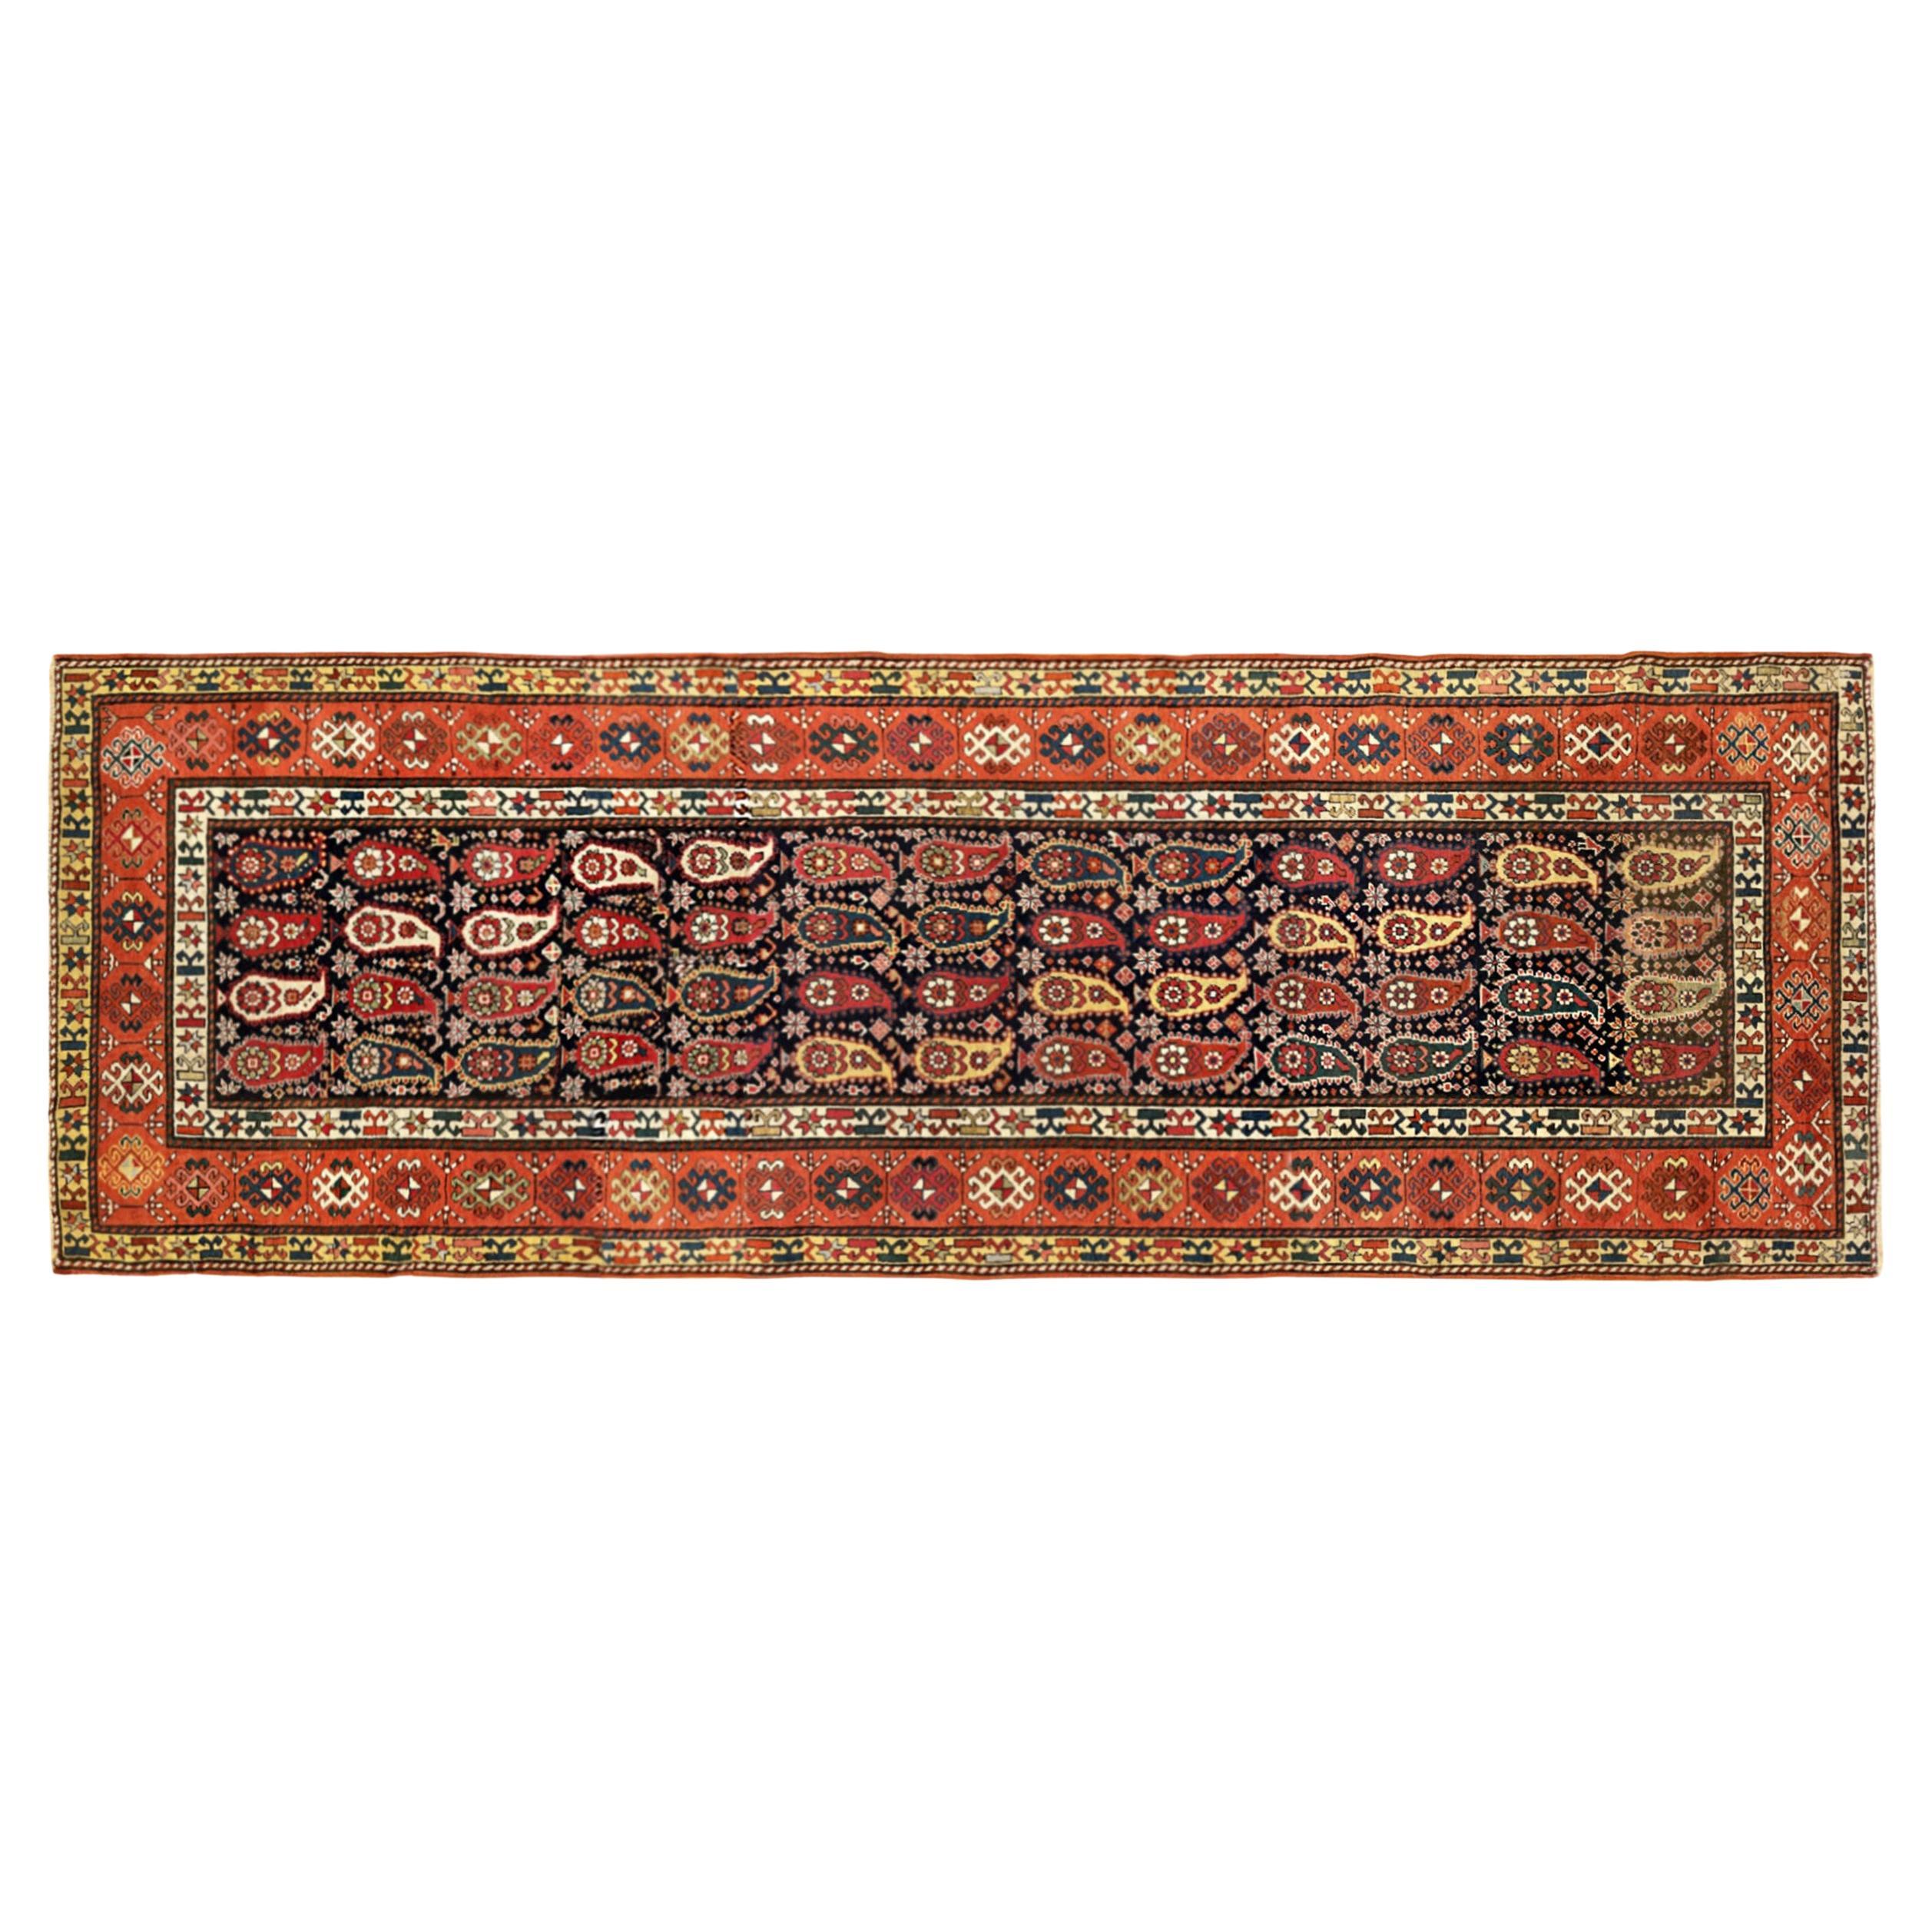 Antique Caucasian Shirvan Oriental Rug in Runner Size with Paisley Design